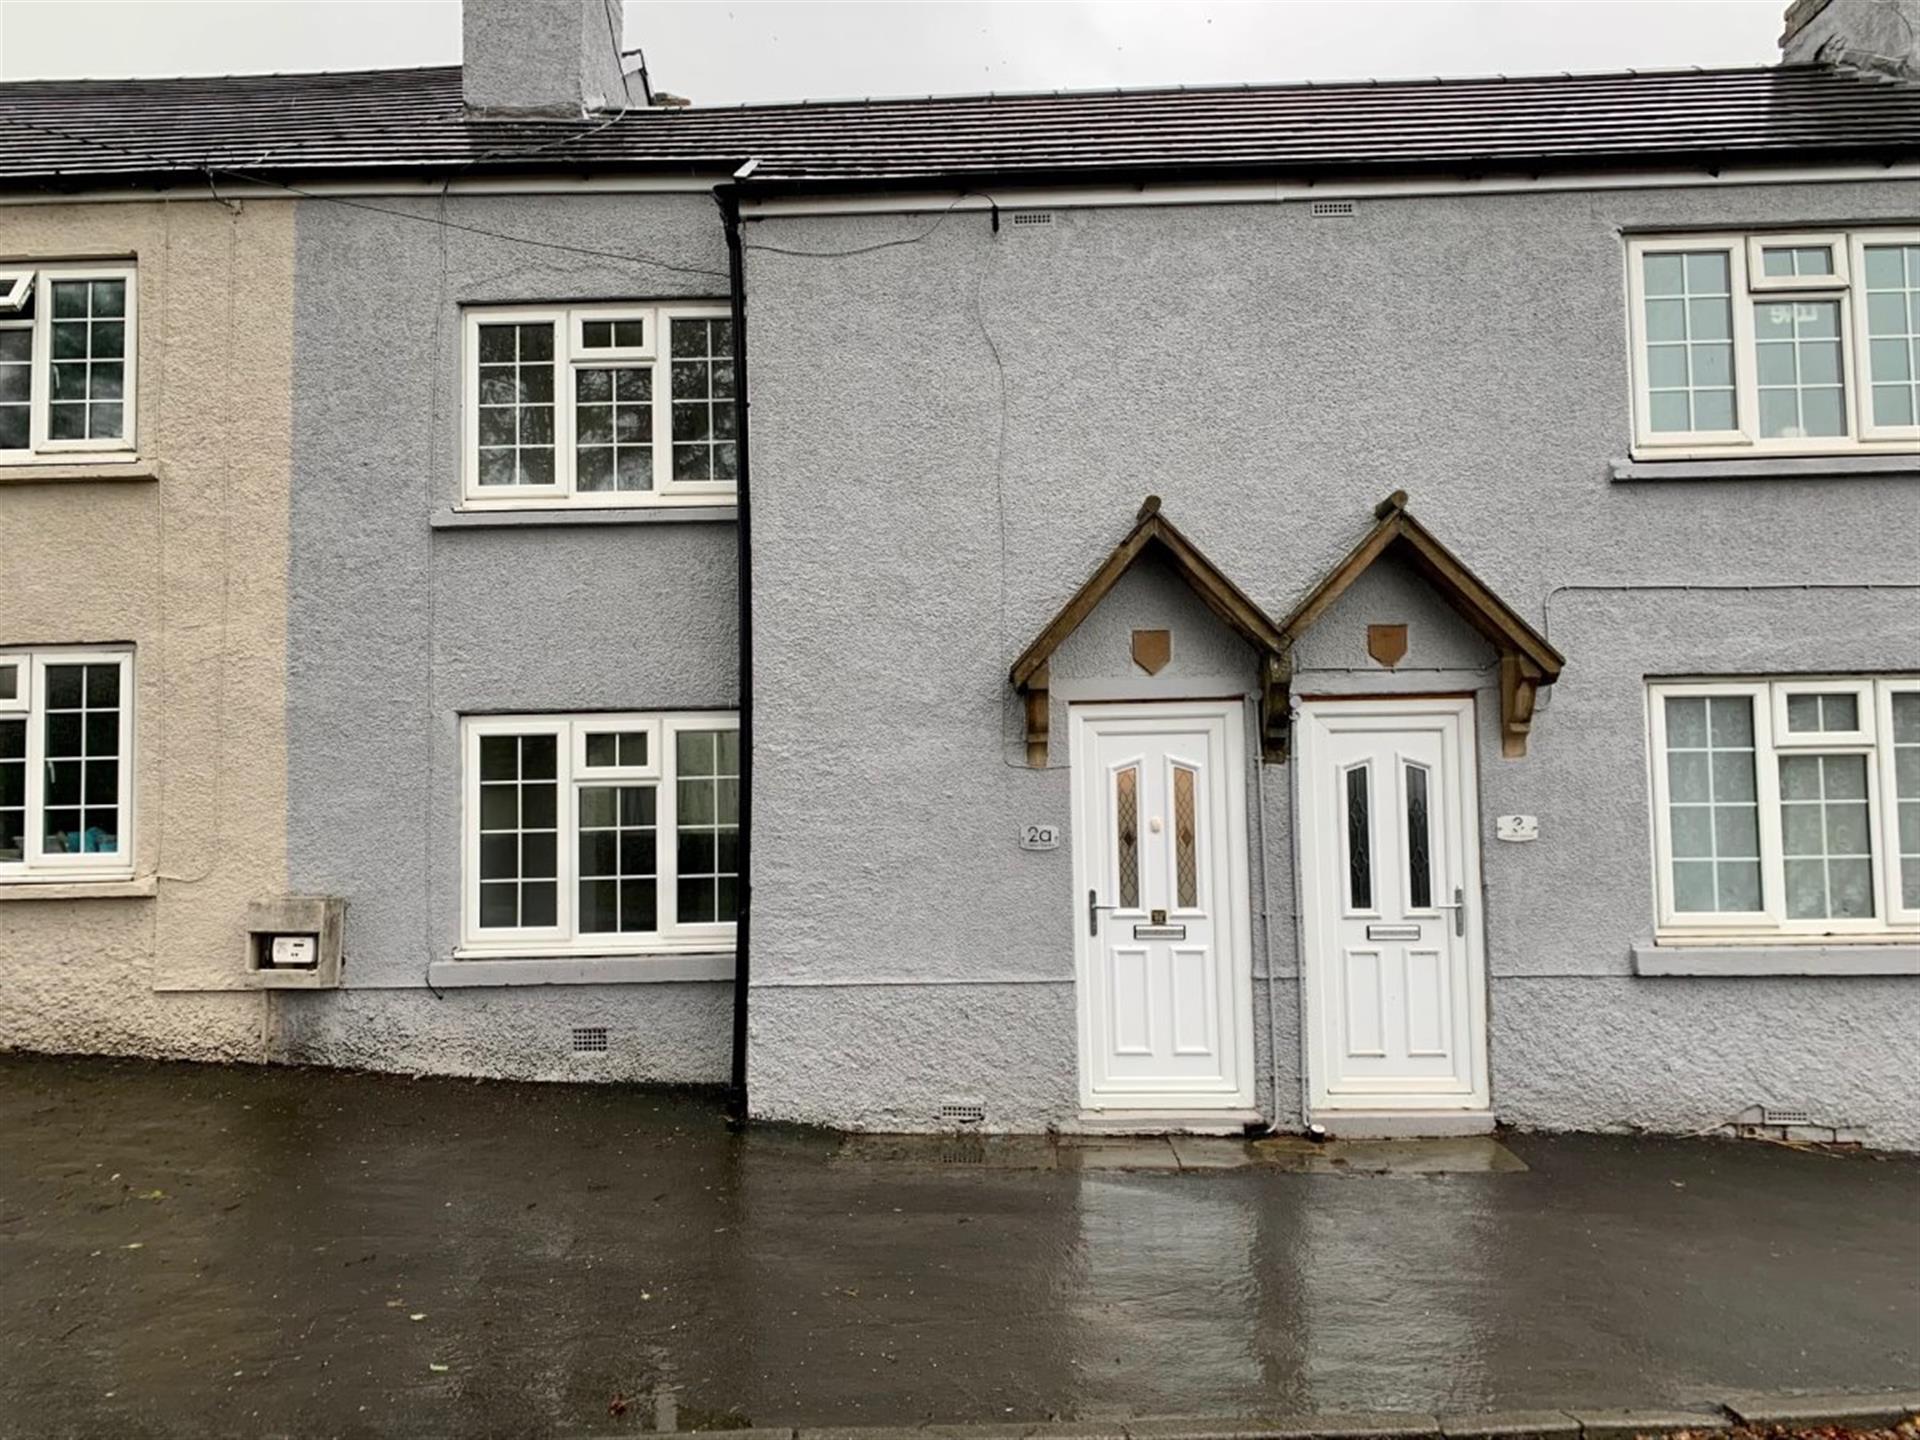 2 bedroom terraced house To Let in High Etherley - photograph 1.